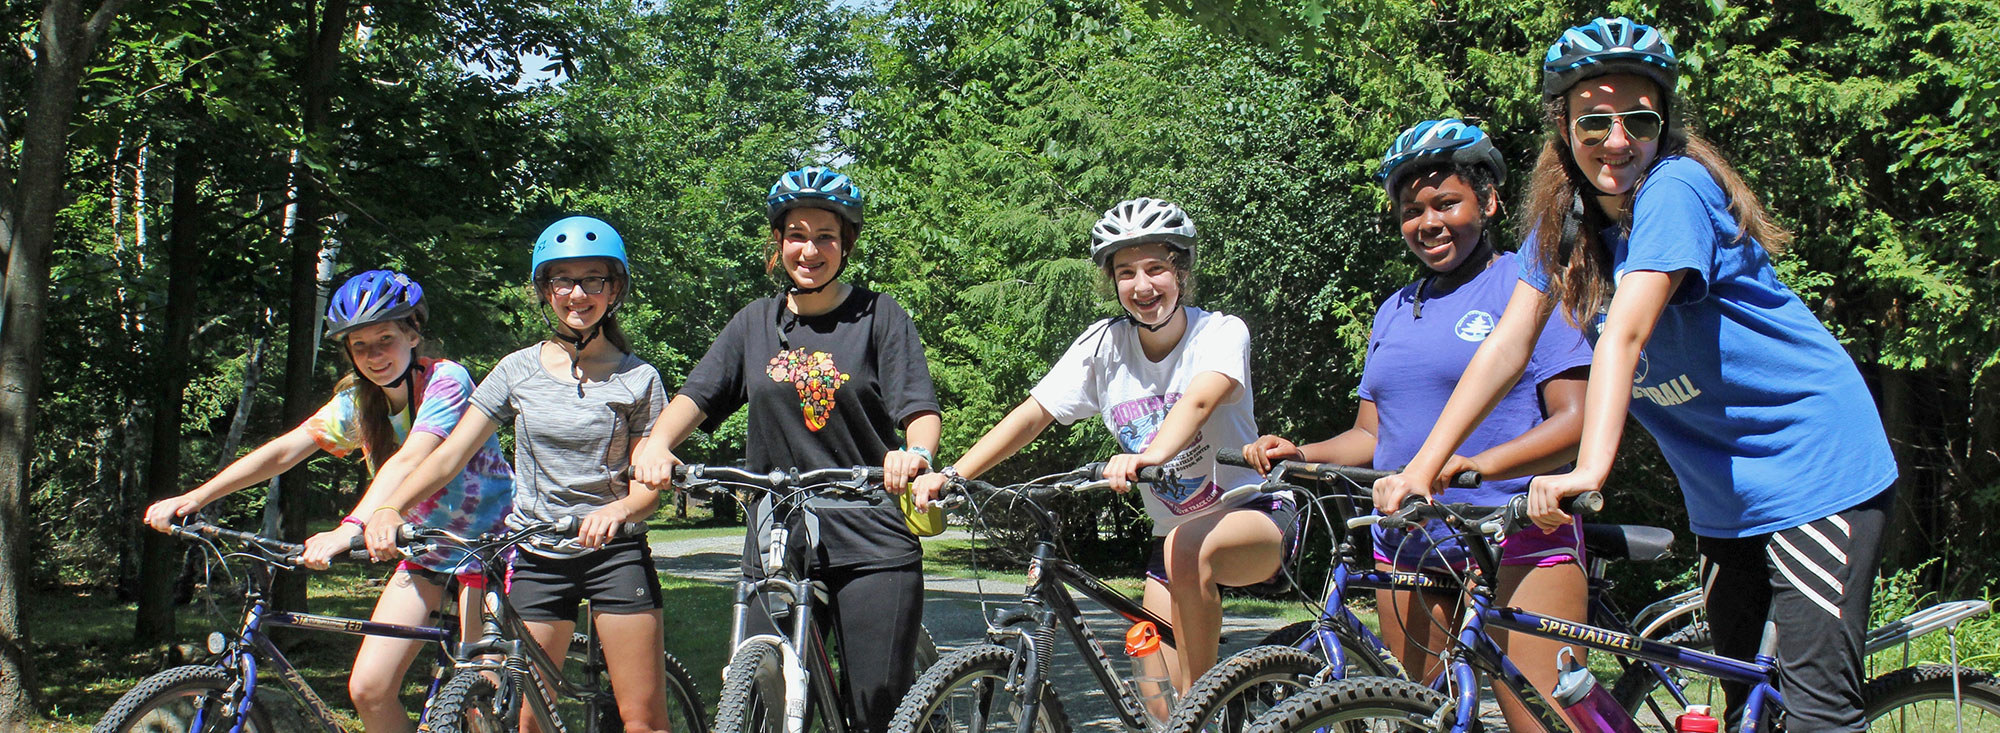 Whippoorwill  Campers on Bikes